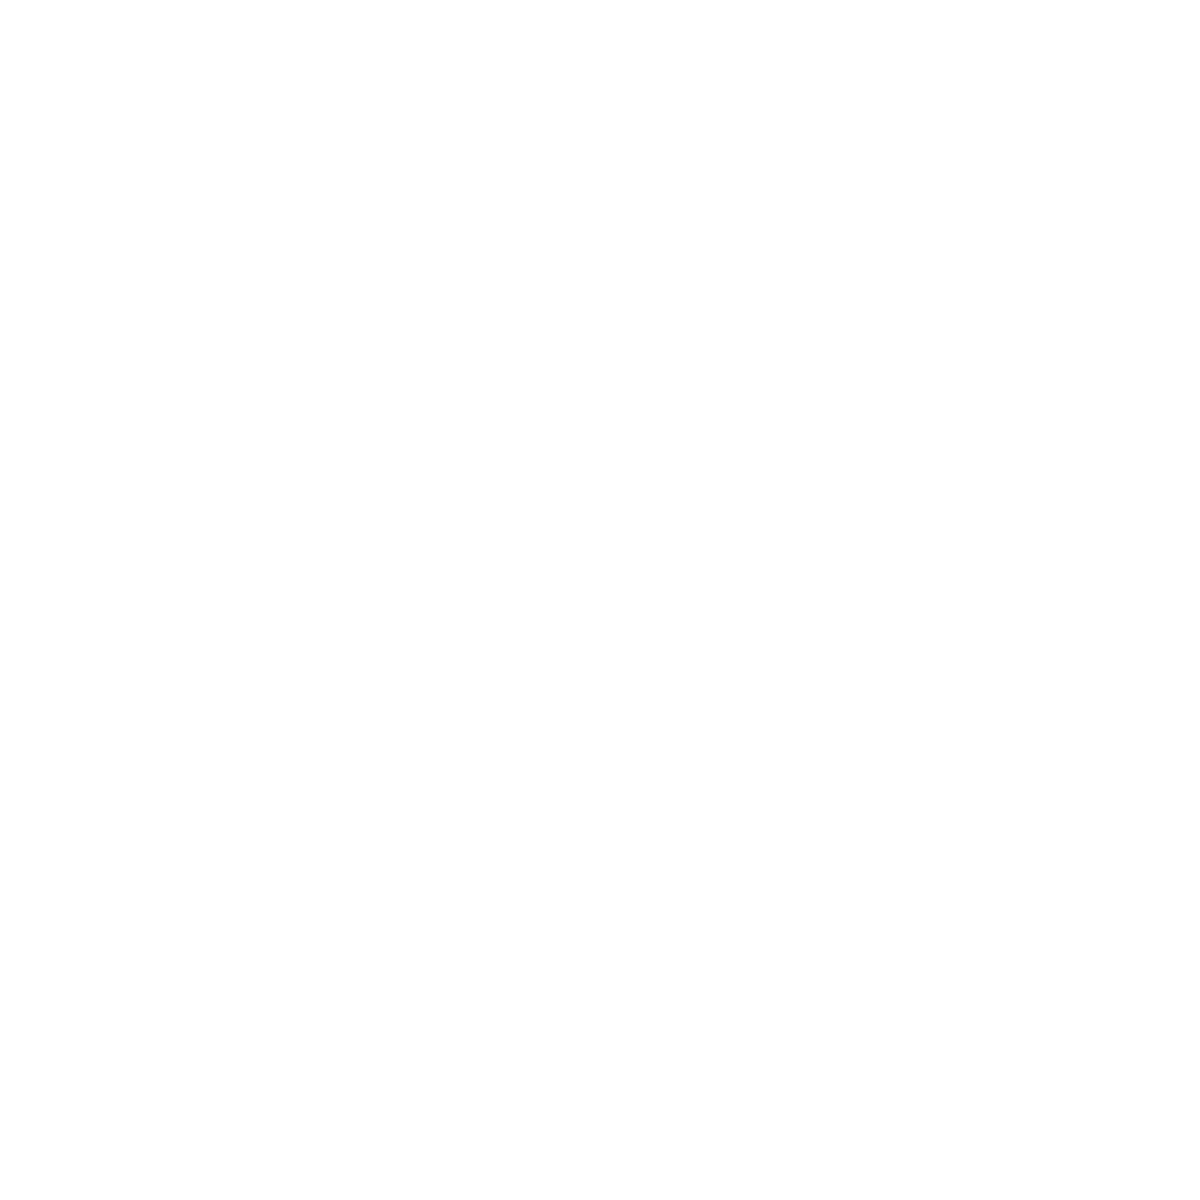 Loughs Agency look forward to supporting the 2022 Foyle Maritime Festival